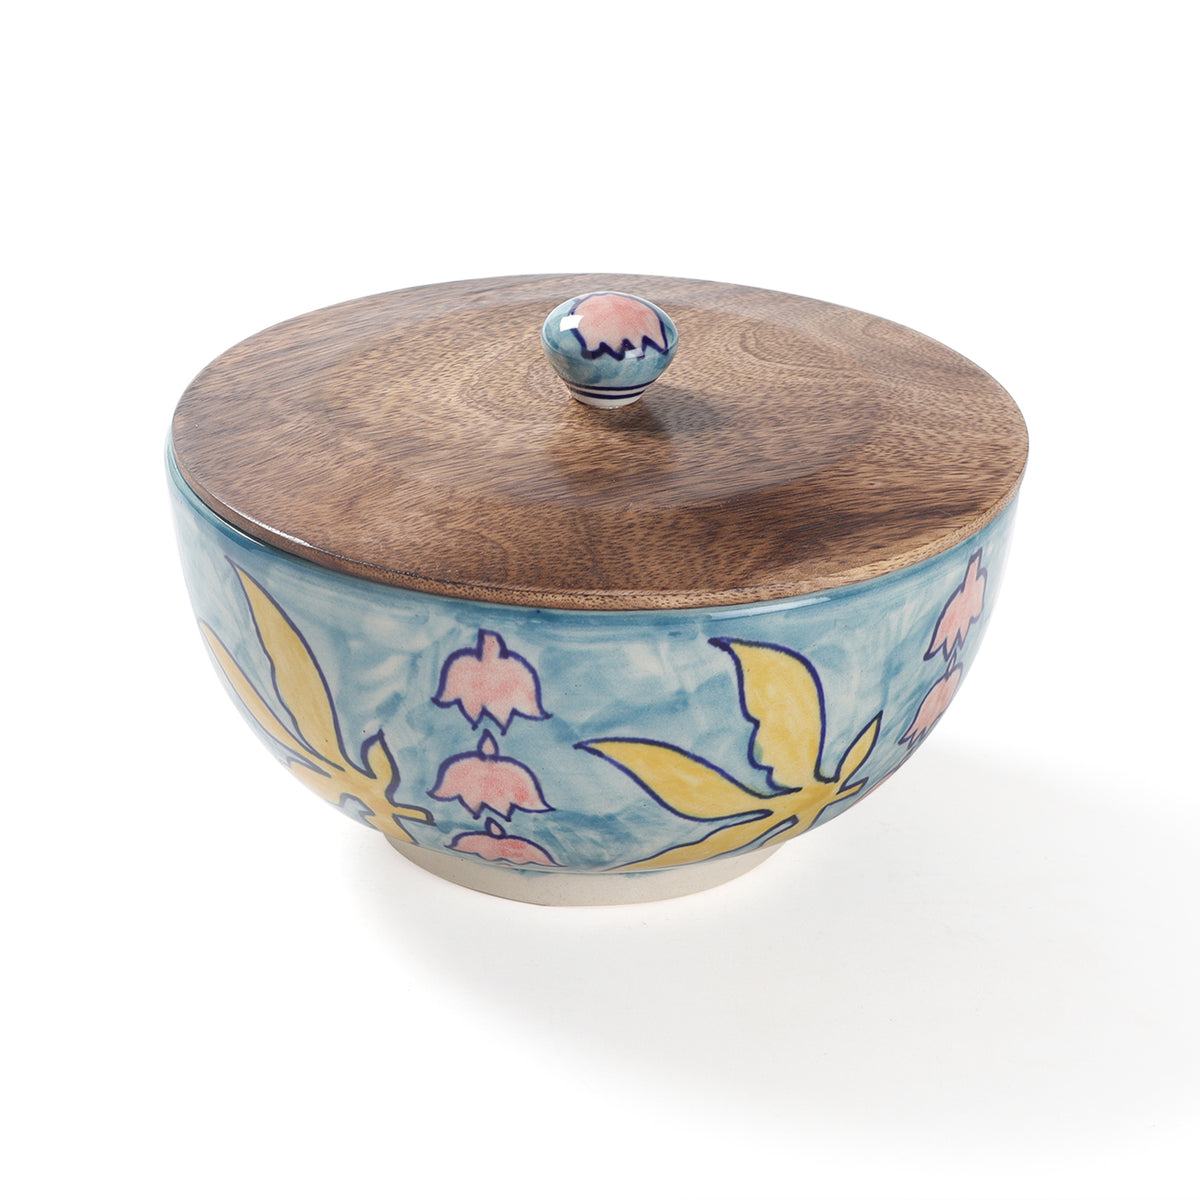 Handpainted Ceramic Serving Bowls with Lid -7.5"